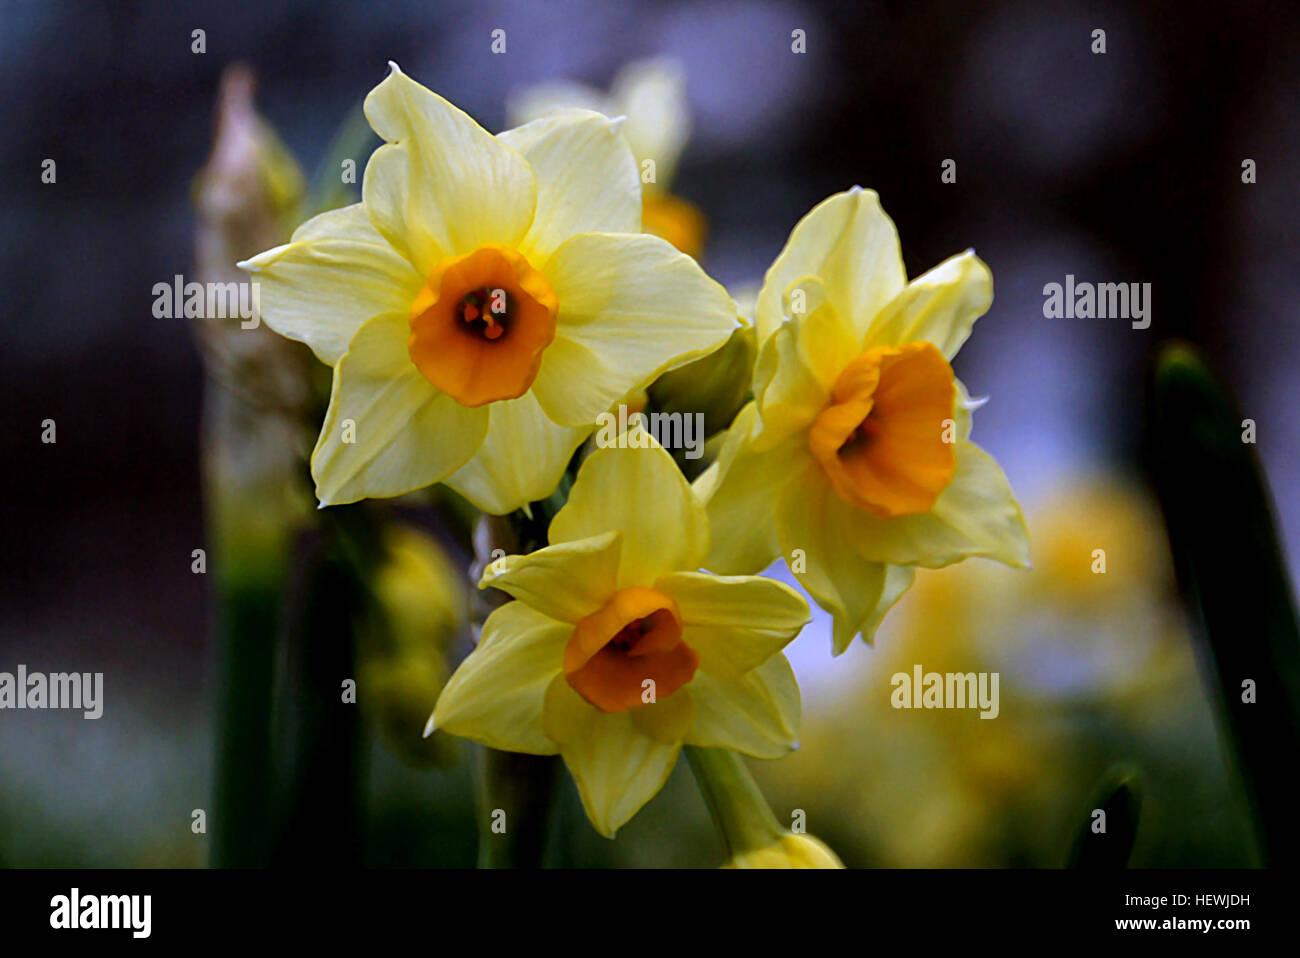 Narcissus is a genus of mainly hardy, mostly spring-flowering, bulbous perennials in the Amaryllis family, subfamily Amaryllidoideae. Various common names including daffodil, narcissus, and jonquil are used to describe all or some of the genus Stock Photo